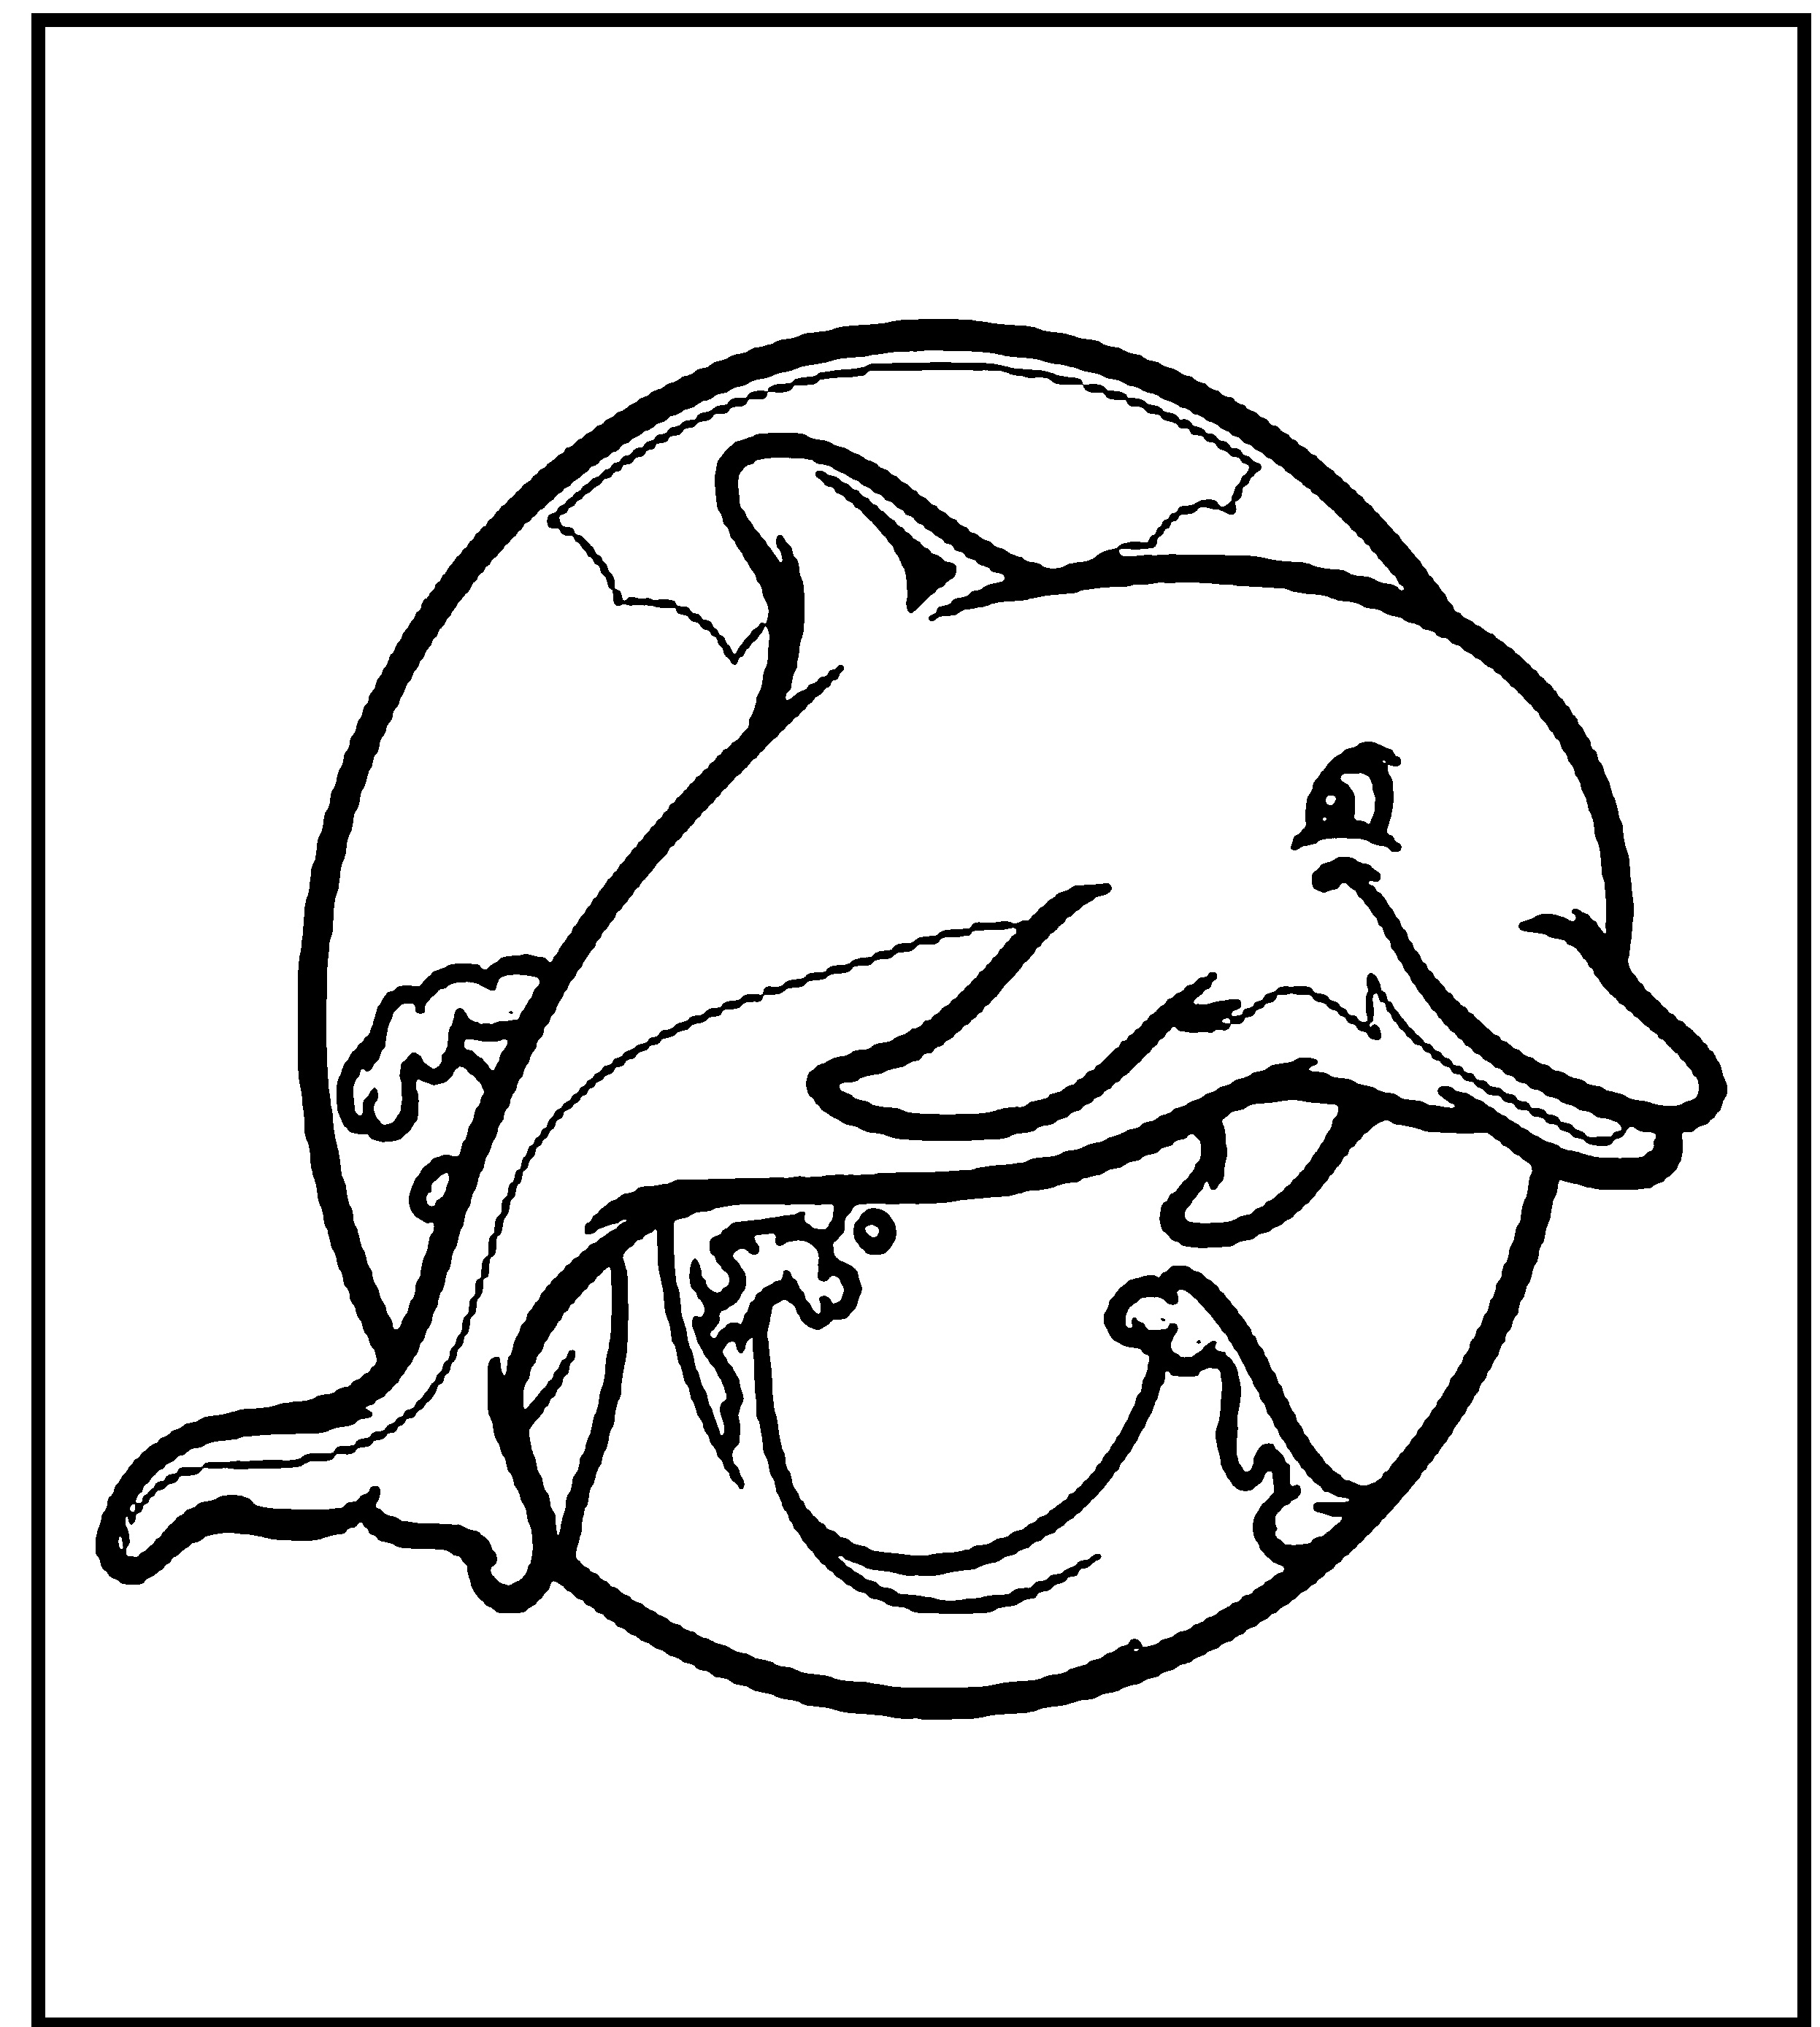 coloring-dolphin-pages-sketch-coloring-page